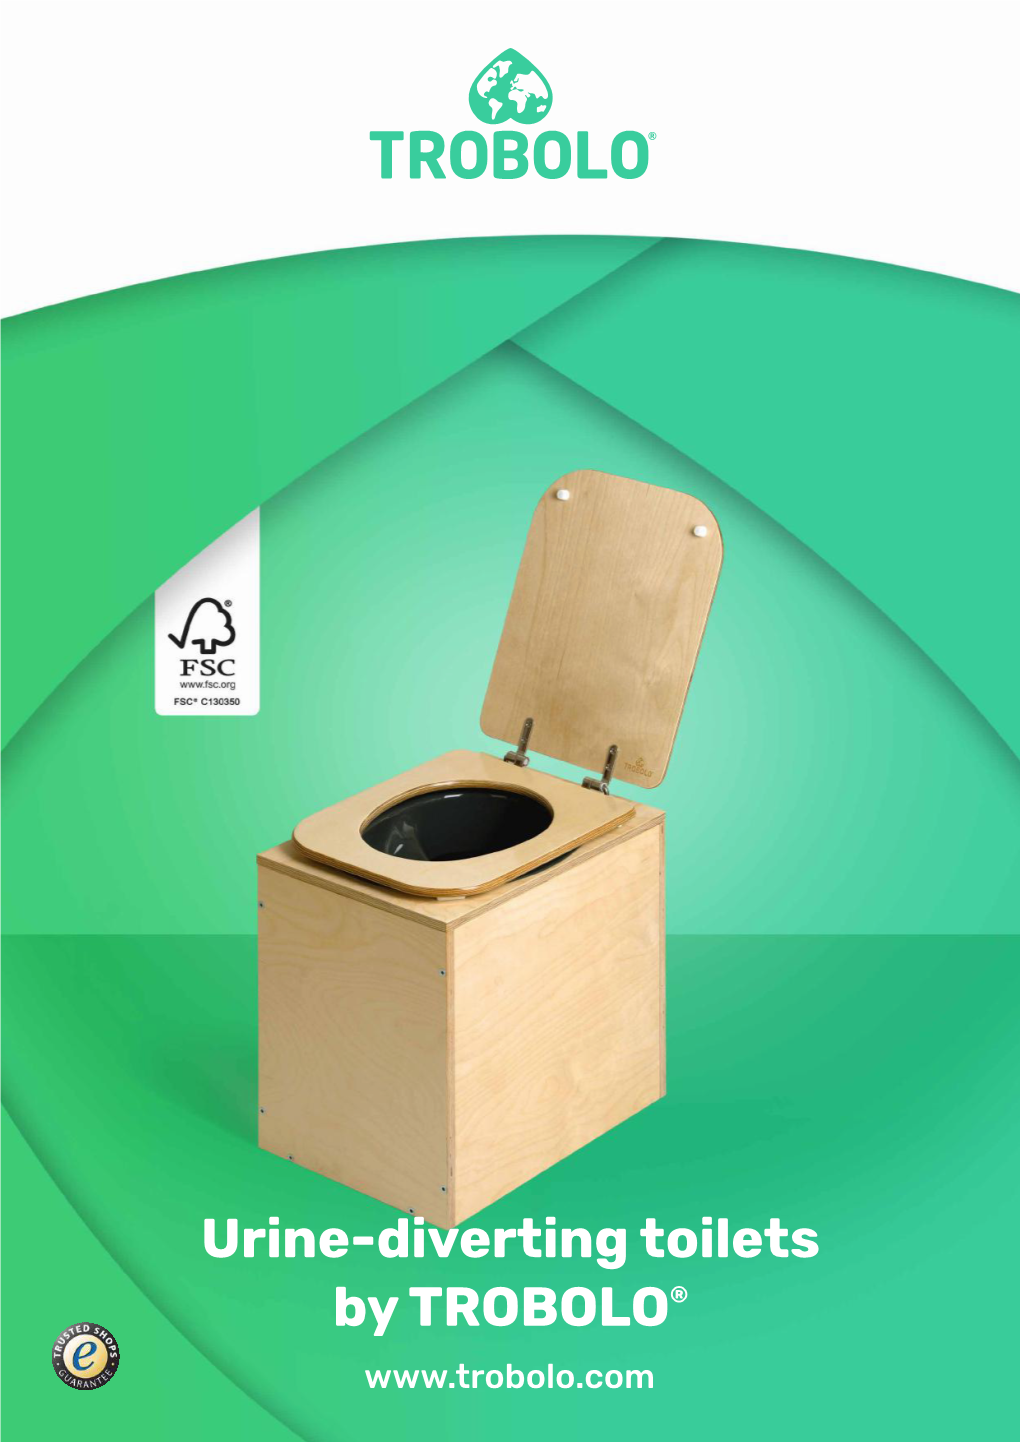 This Is What a Urine-Diverting Toilet by TROBOLO® Offers